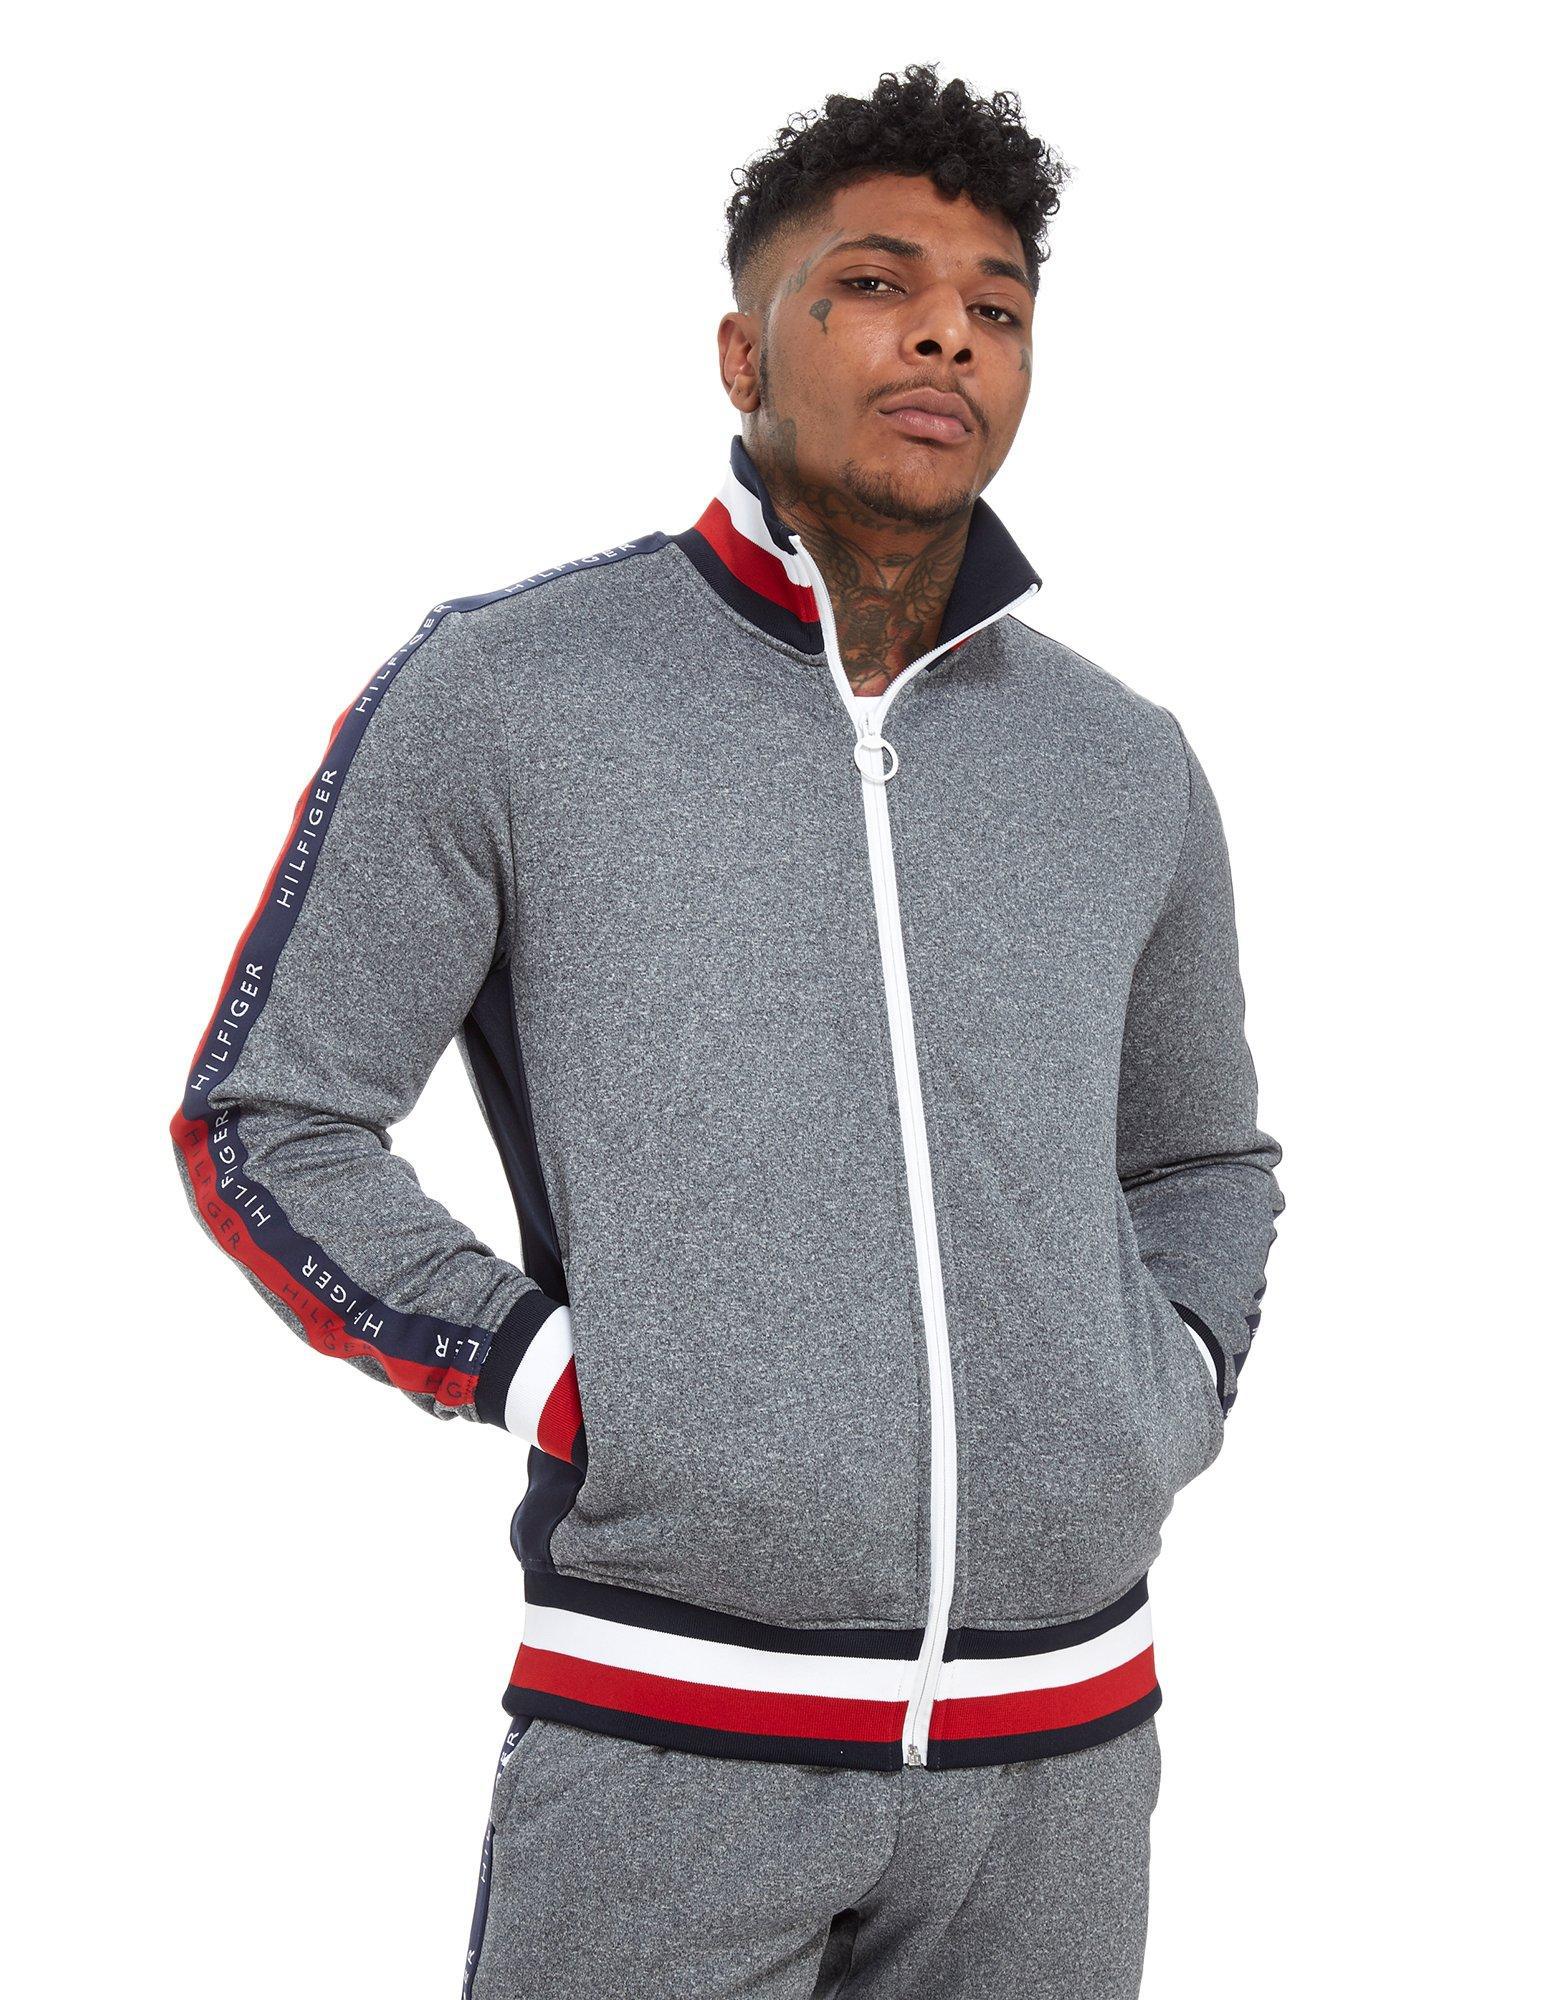 Tommy Hilfiger Tracksuit Top Store, 70% OFF | www.angloamericancentre.it